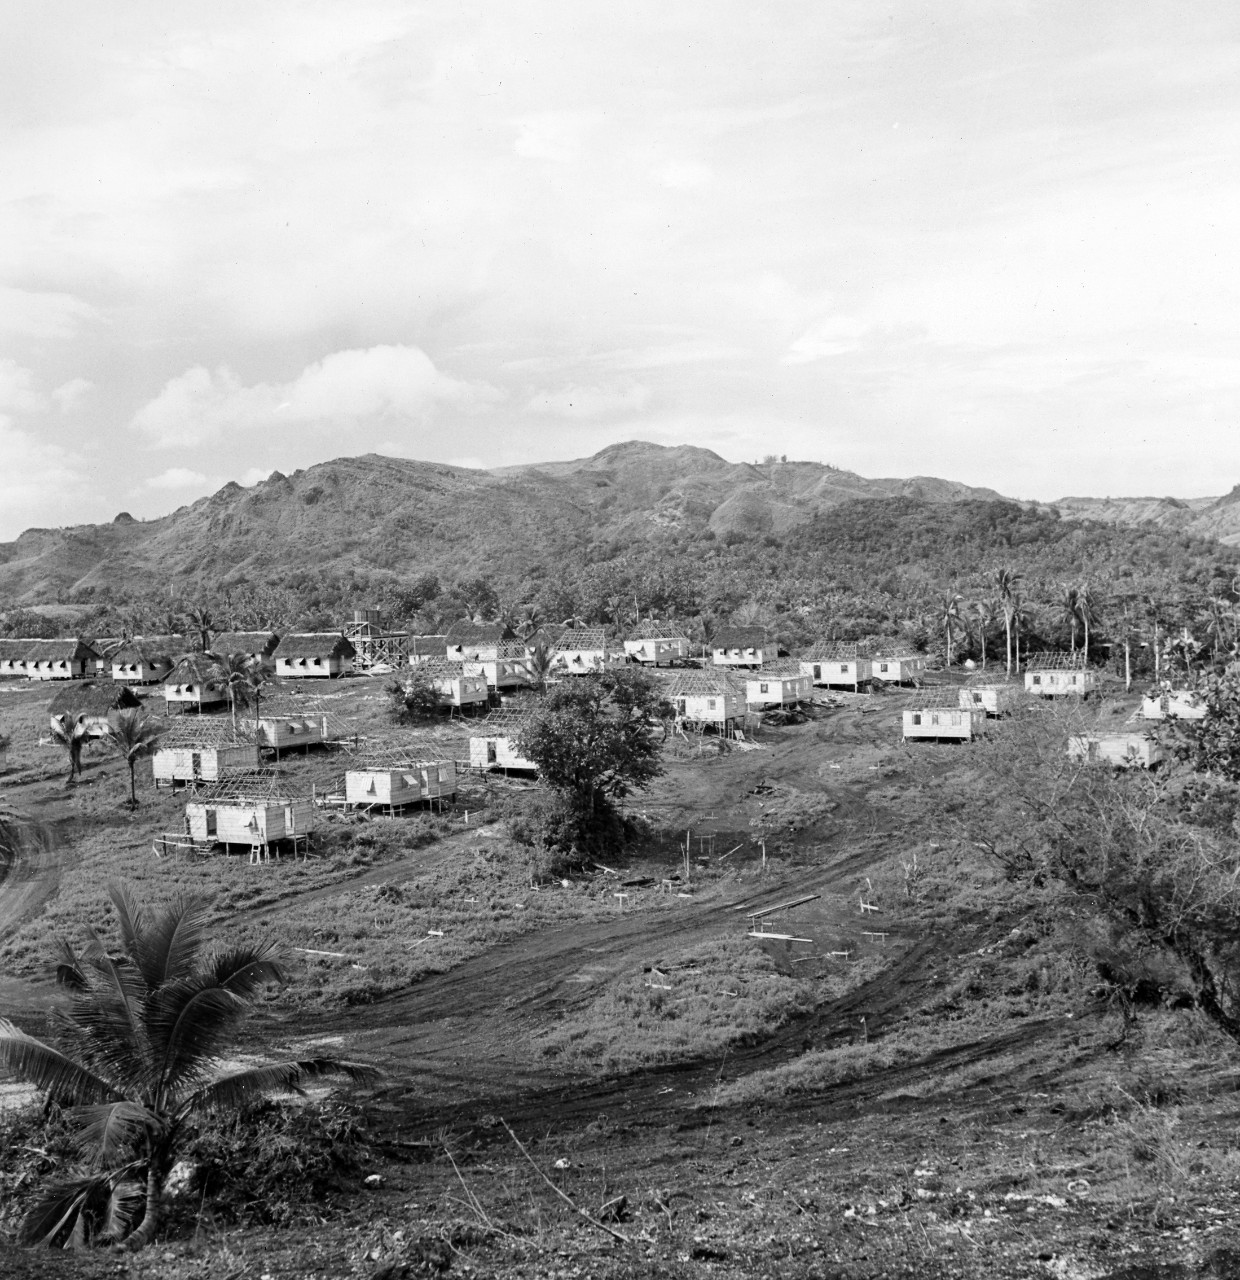 Guam "boom town" - their own homes wrecked in the destruction attendant upon the battle for Guam, many natives of the island now live in these homes built by the US Civil Affairs authorities. The settlement is known as Sinajana. March 20, 1945.